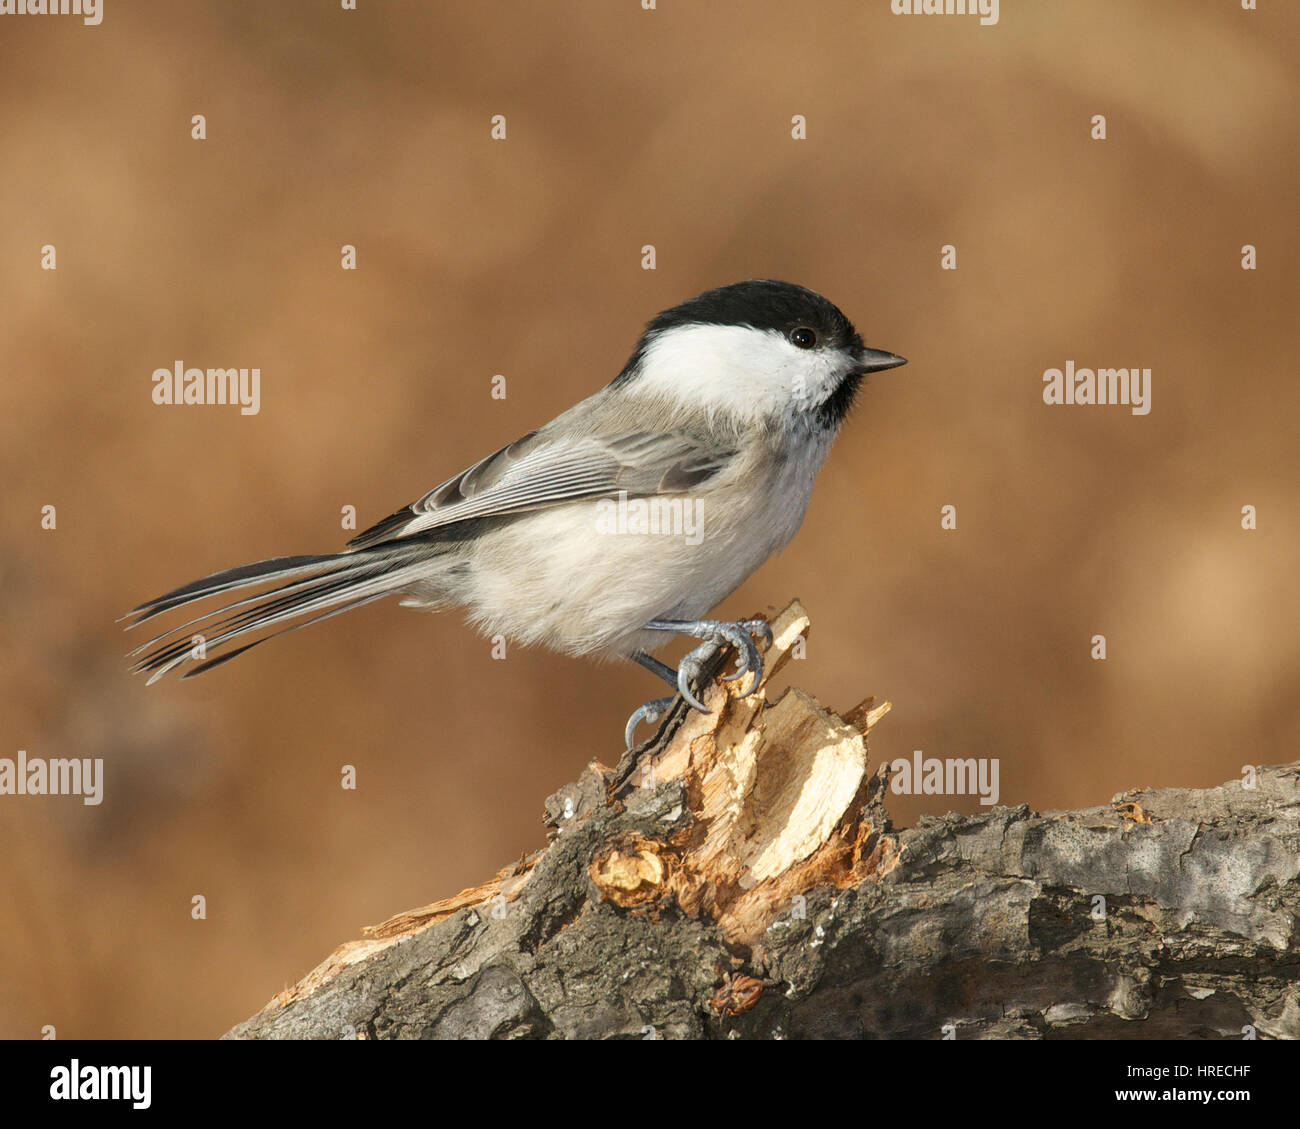 Willow Tit, Parus montanus, on thick branch with brown leaf background Stock Photo